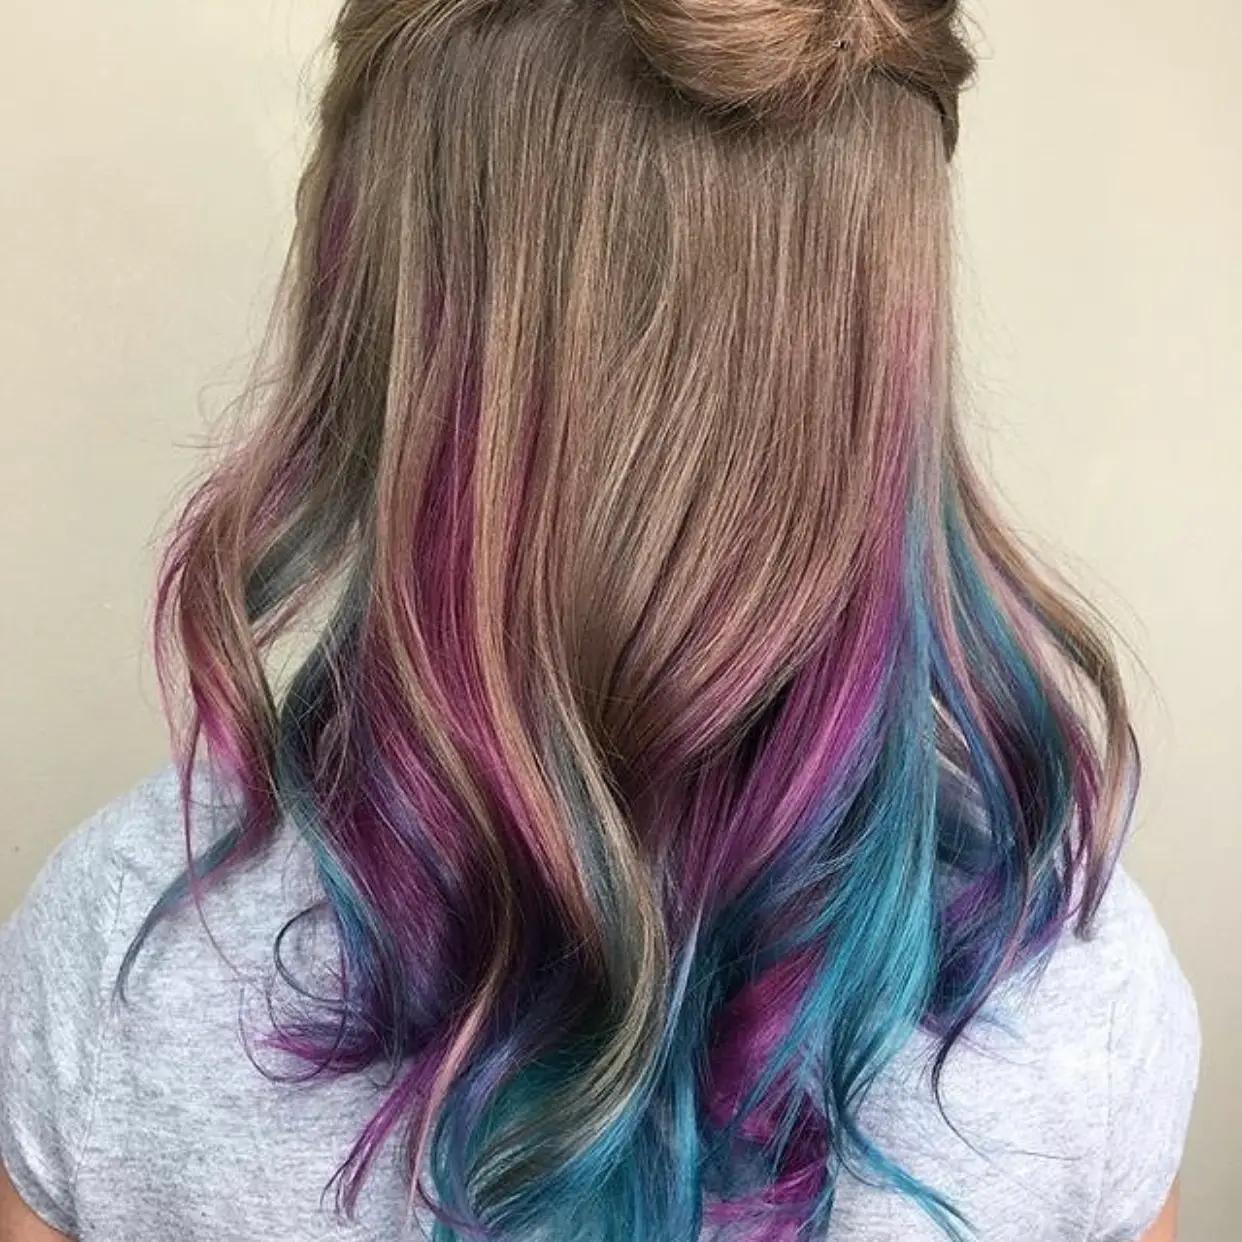 Vibrant Hair Colors with Safe Kids Hair Dye.